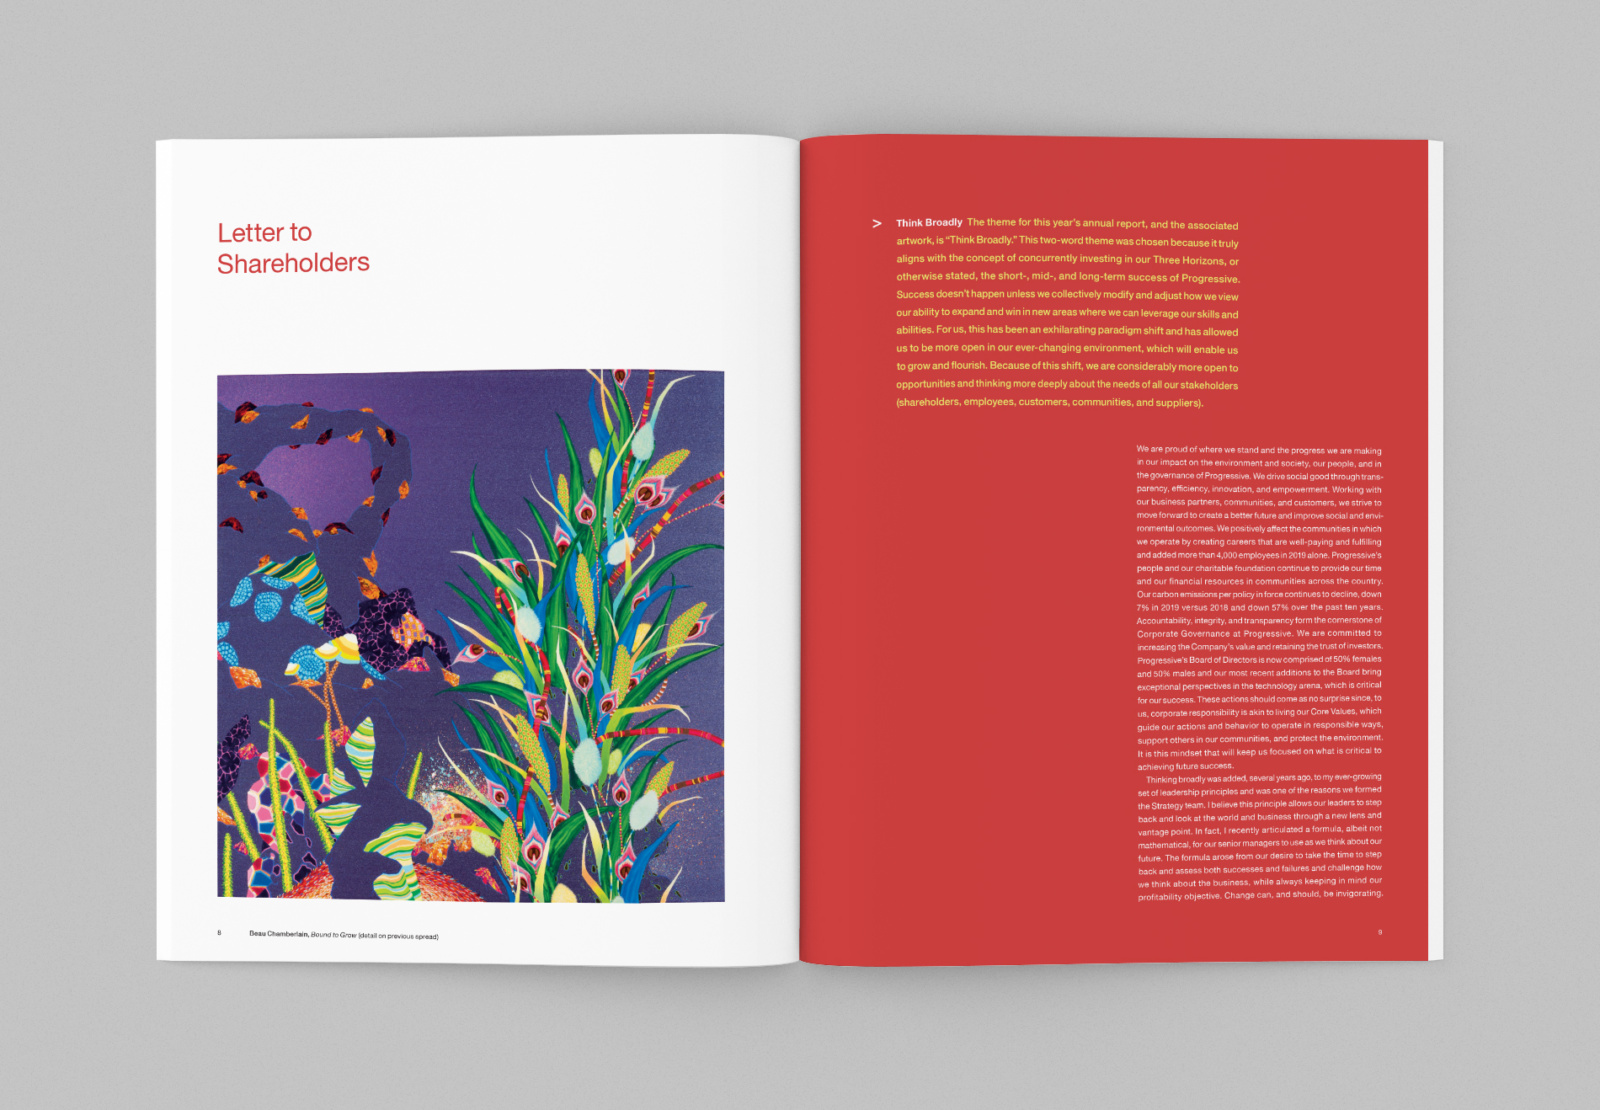 Spread from the 2019 Progressive Corporation annual report design featuring Beau Chamberlain "Bound to Grow" artwork